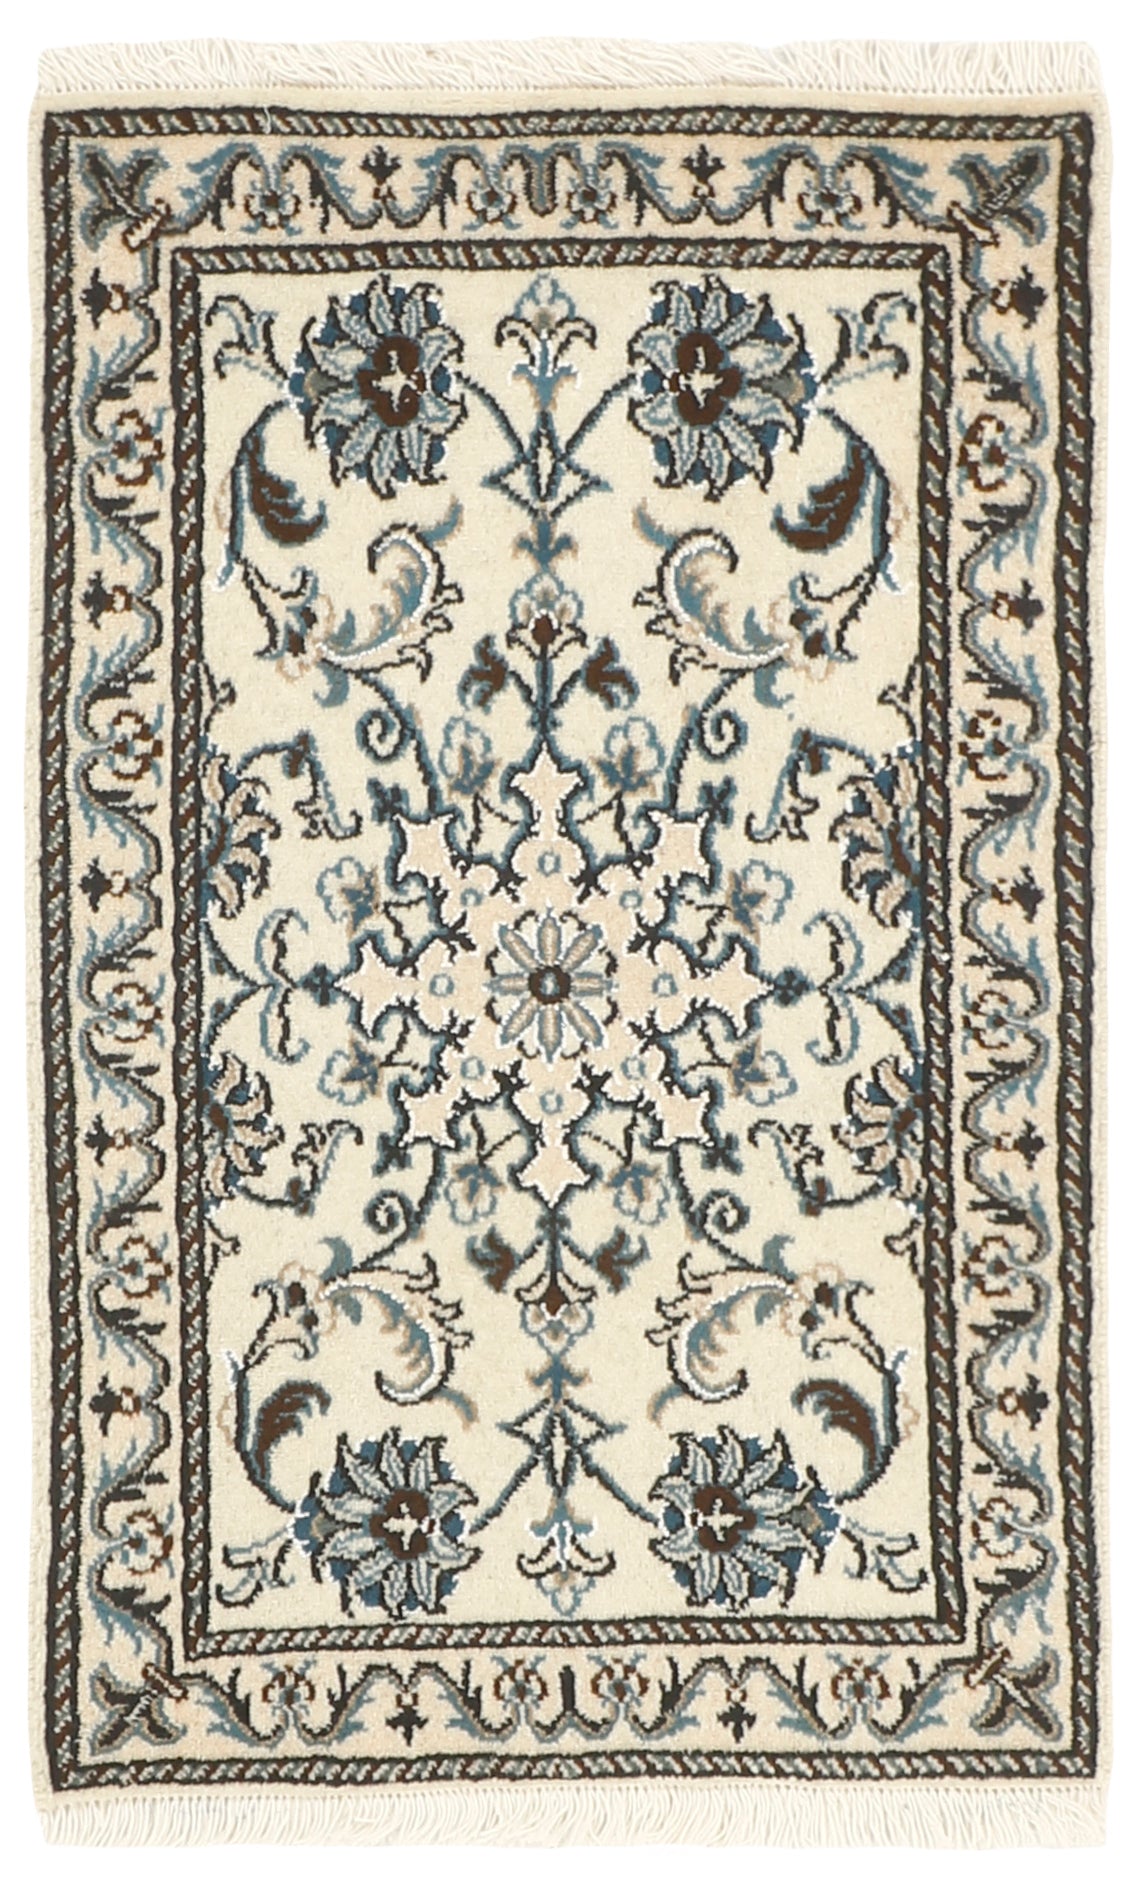 Authentic persian rug with a traditional floral design in beige and blue